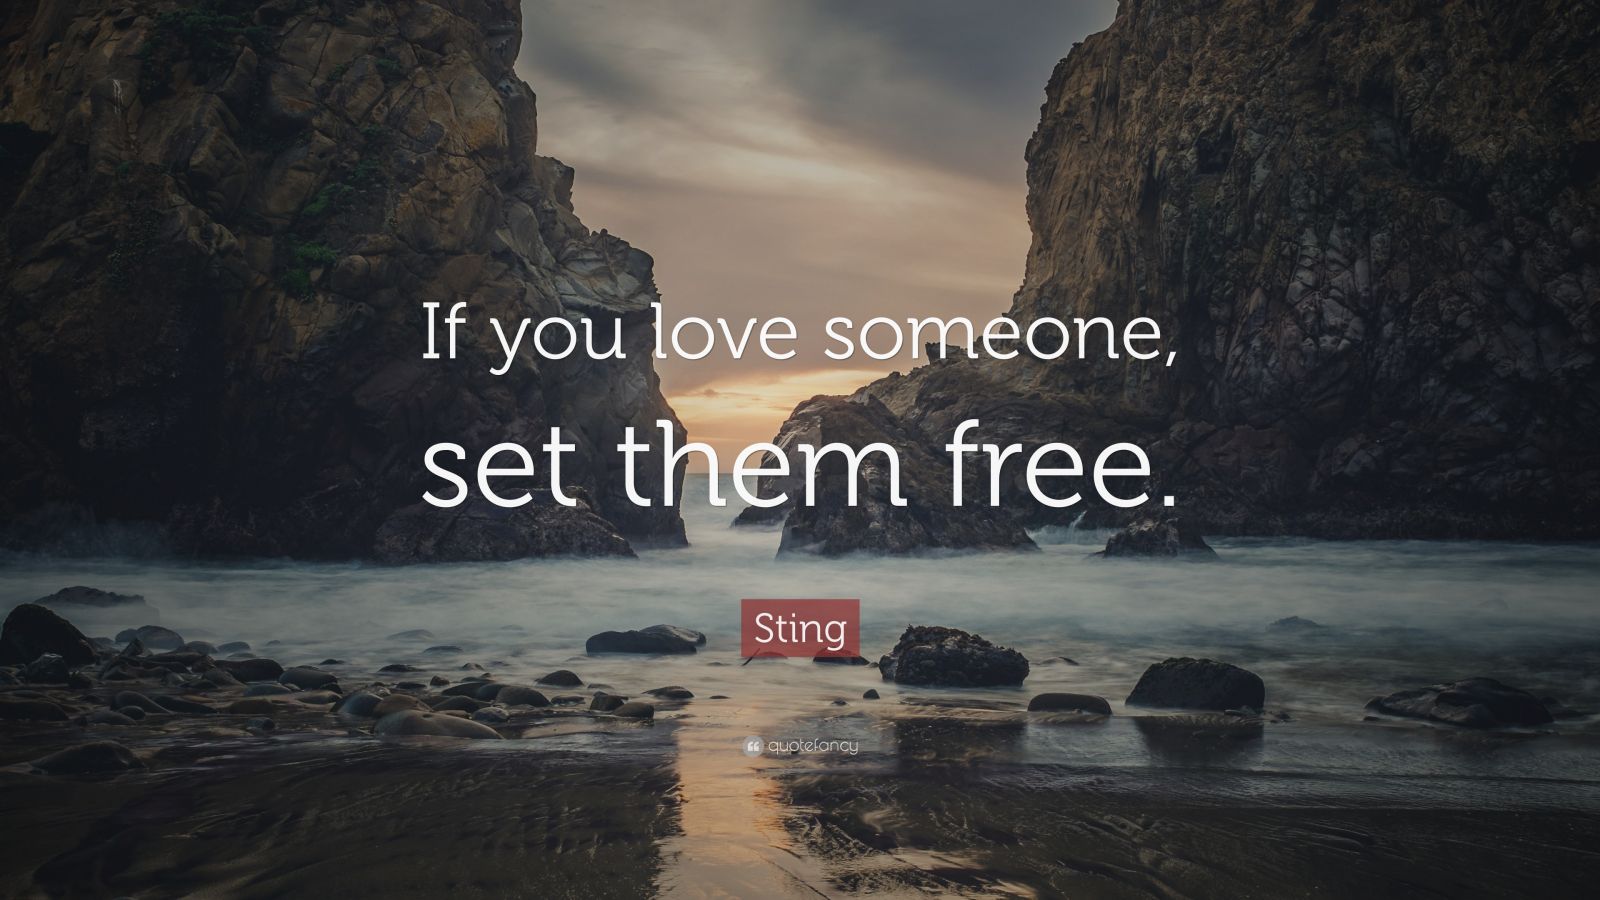 download is it true if you love someone set them free